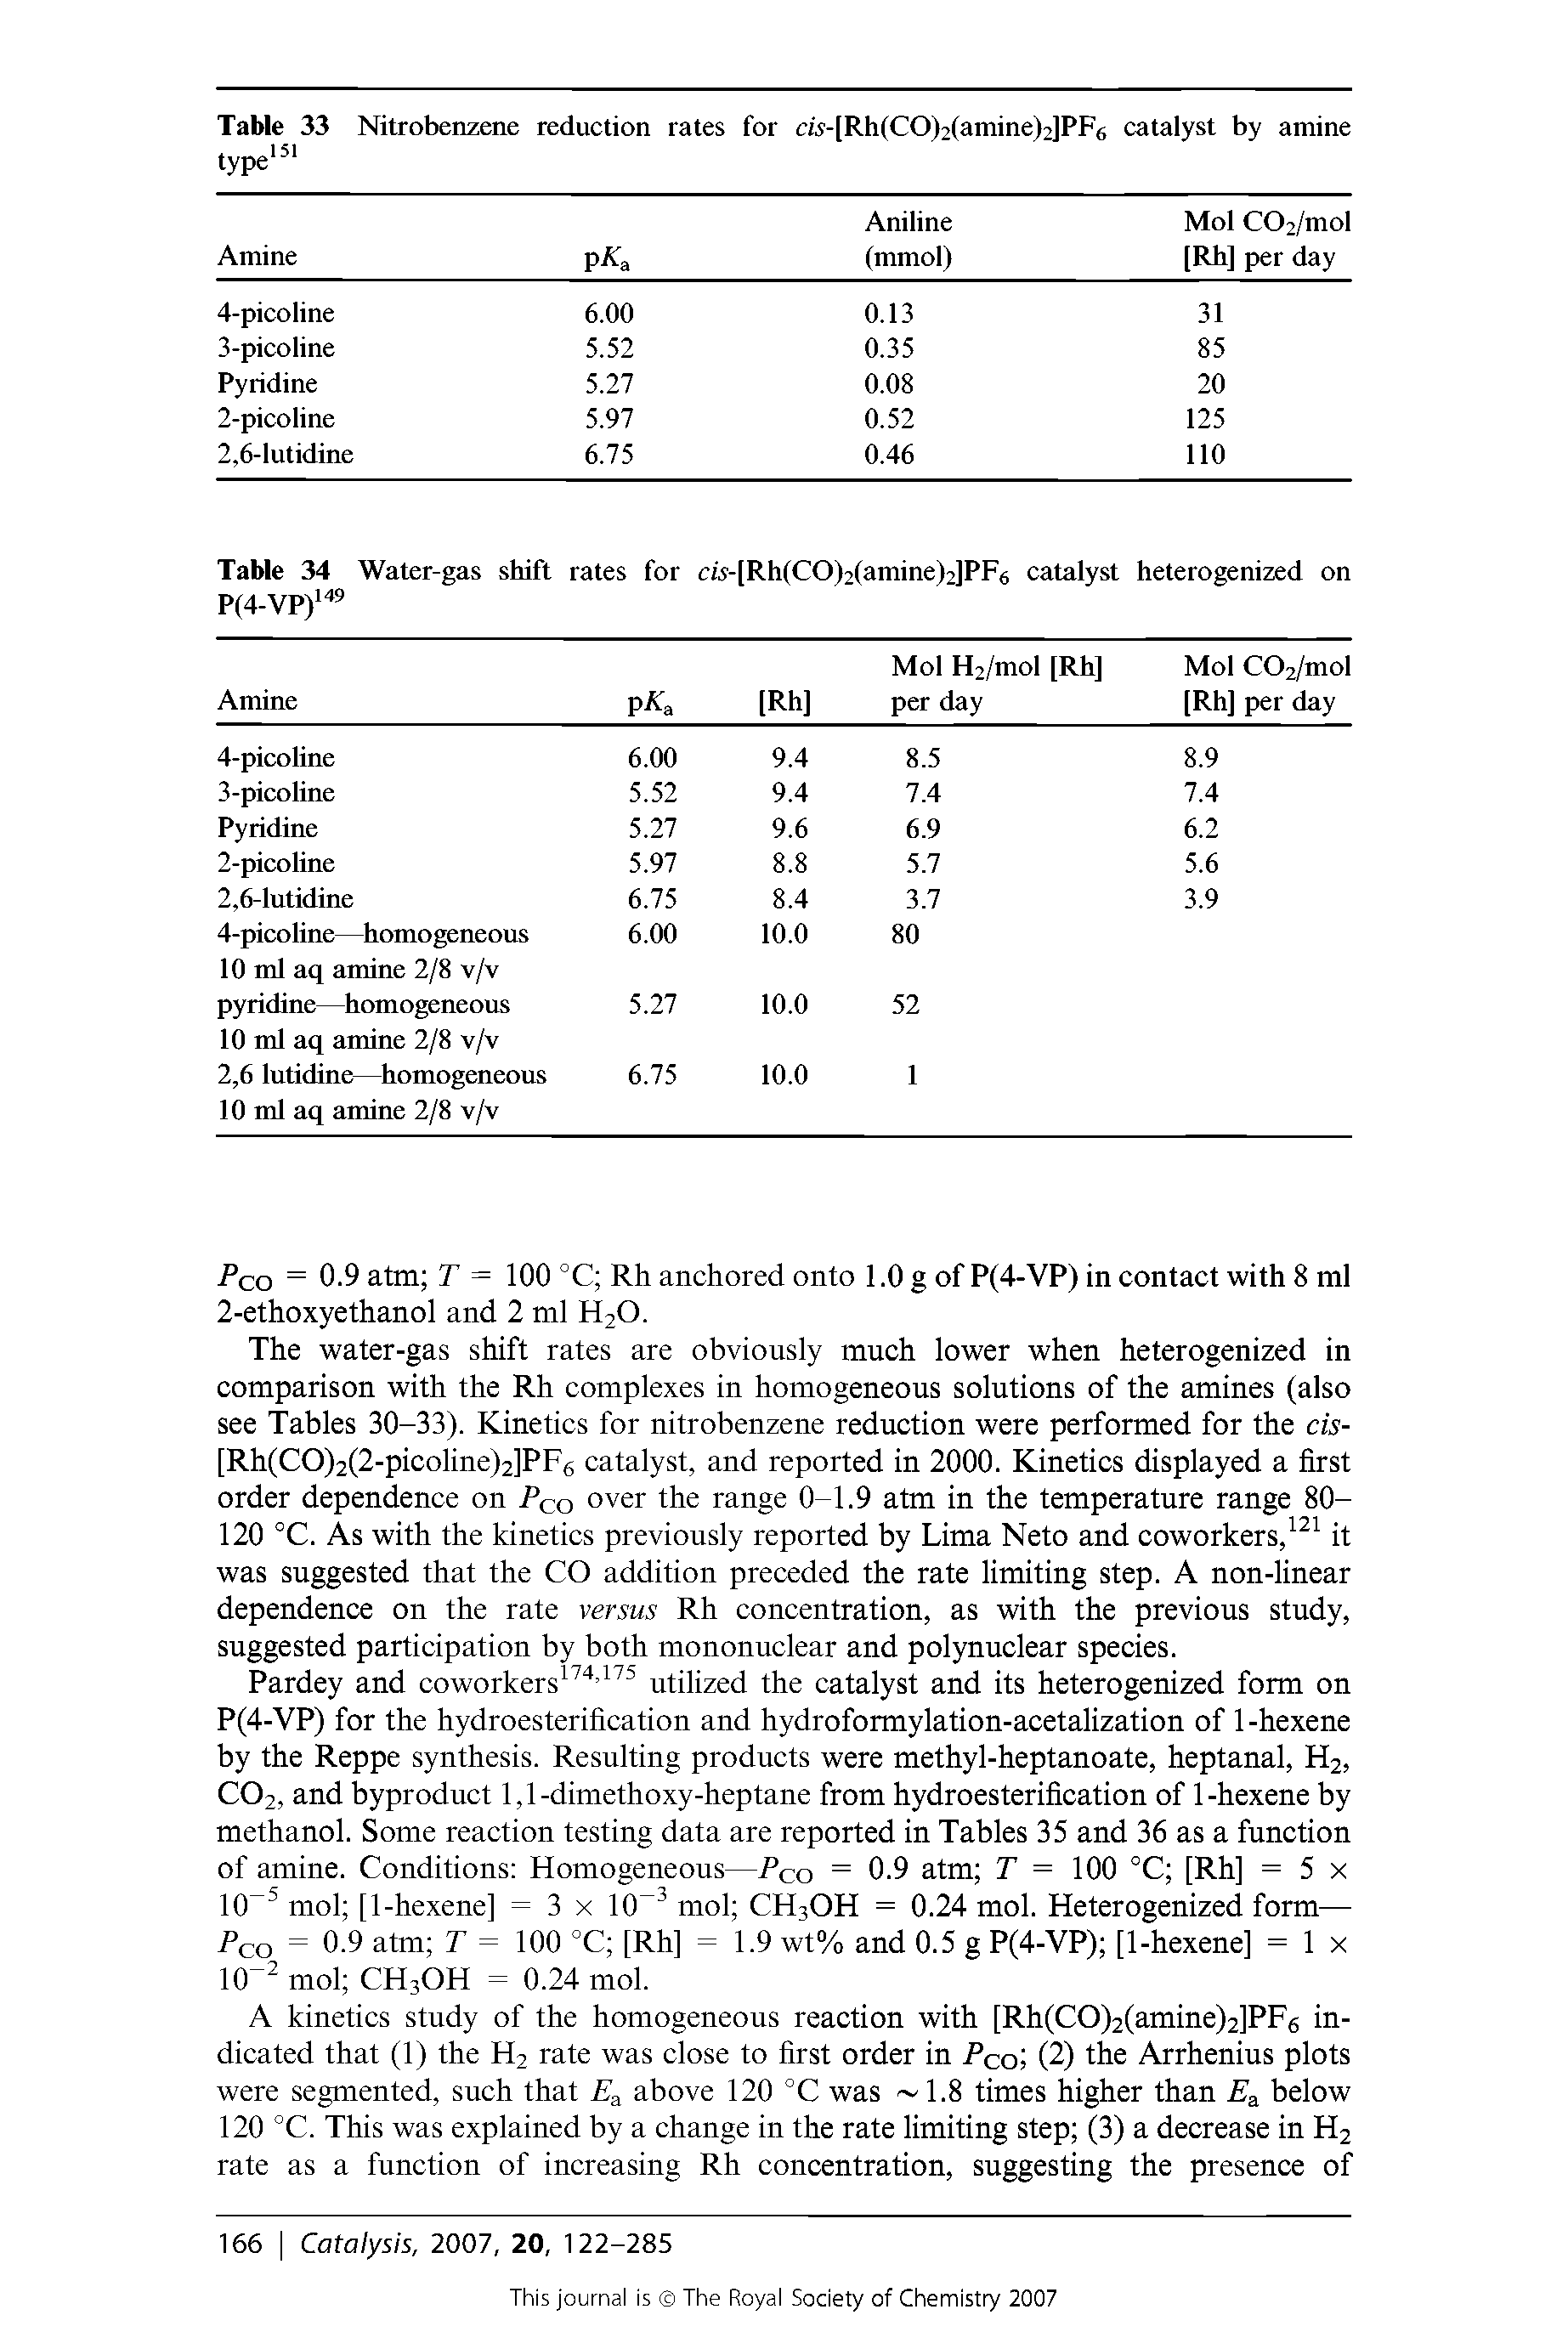 Table 34 Water-gas shift rates for a,s-[Rh(CO)2(amme)2]PF6 catalyst heterogenized on P(4-VP)149...